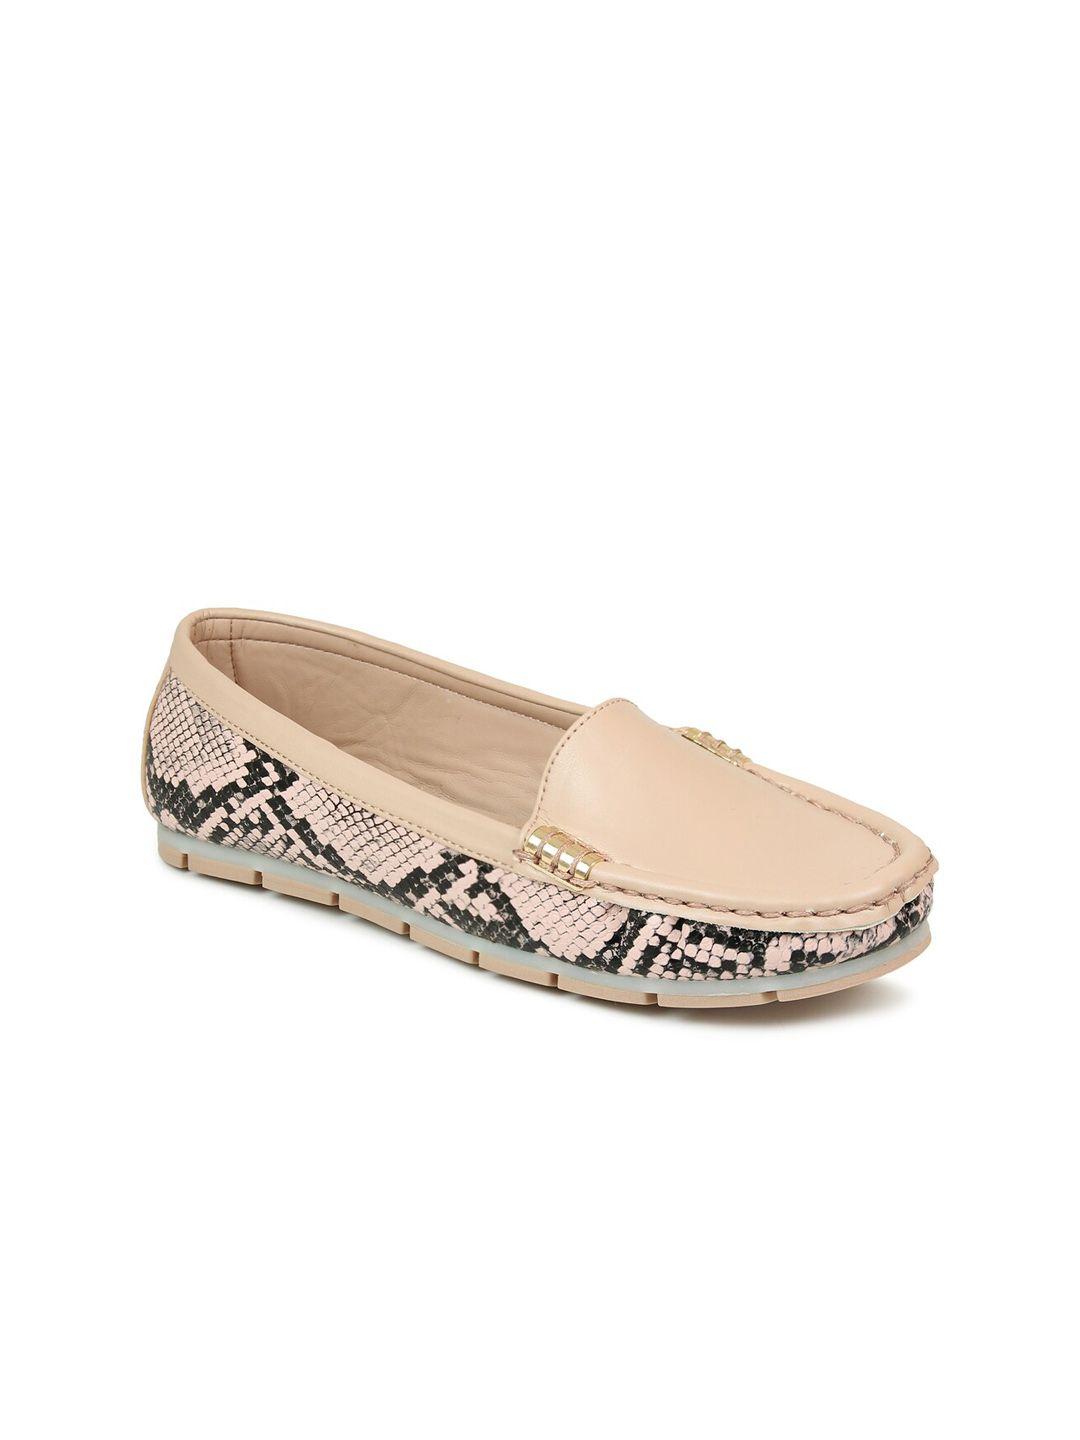 inc 5 women printed loafers